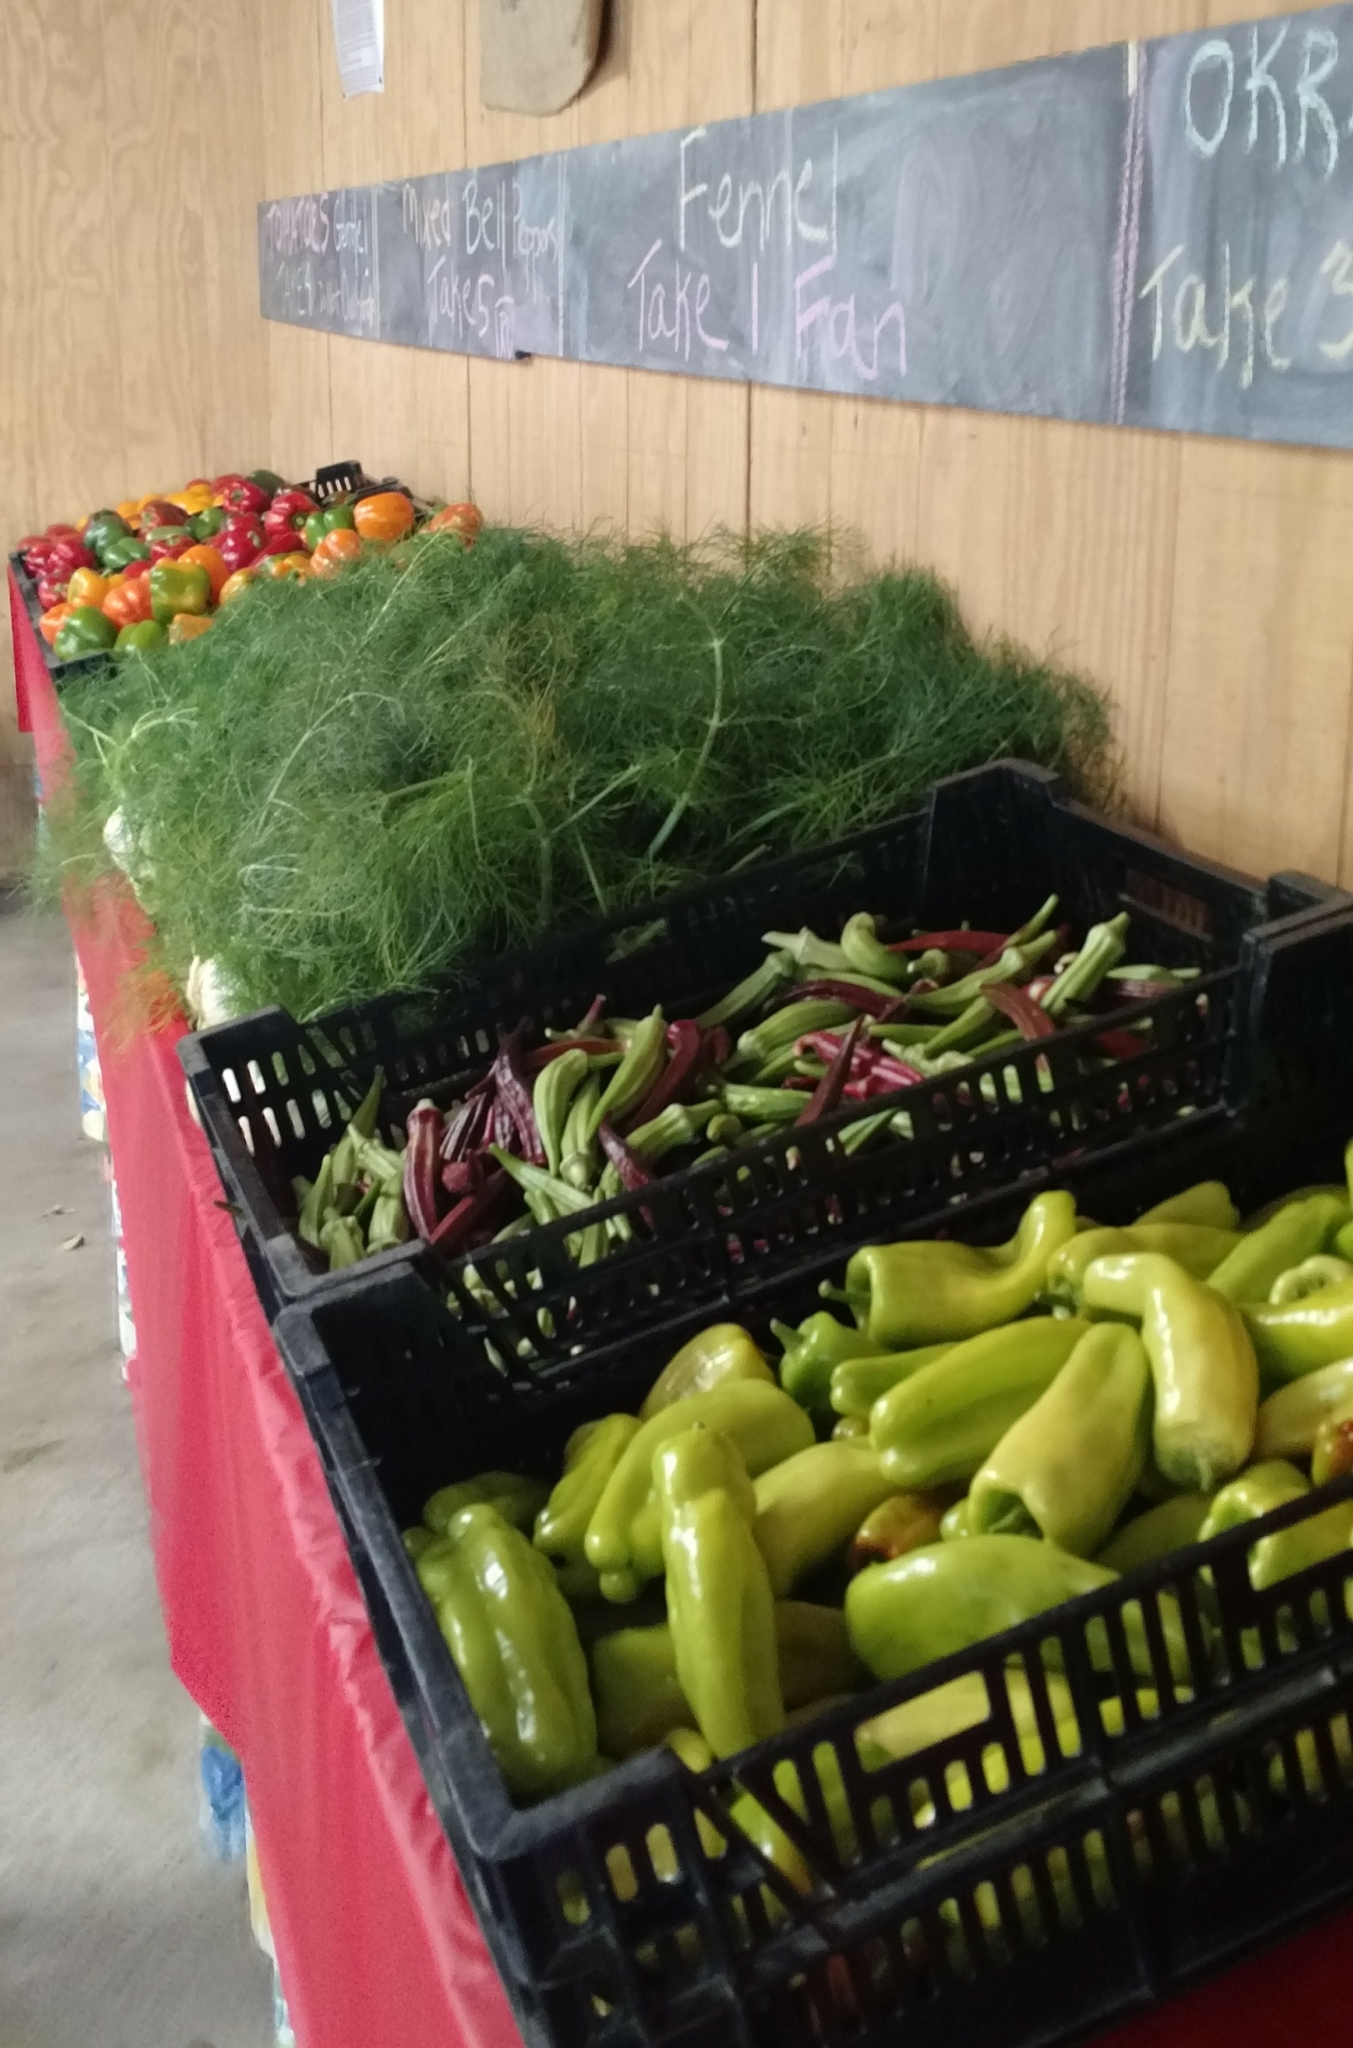 Some of the veggies offered